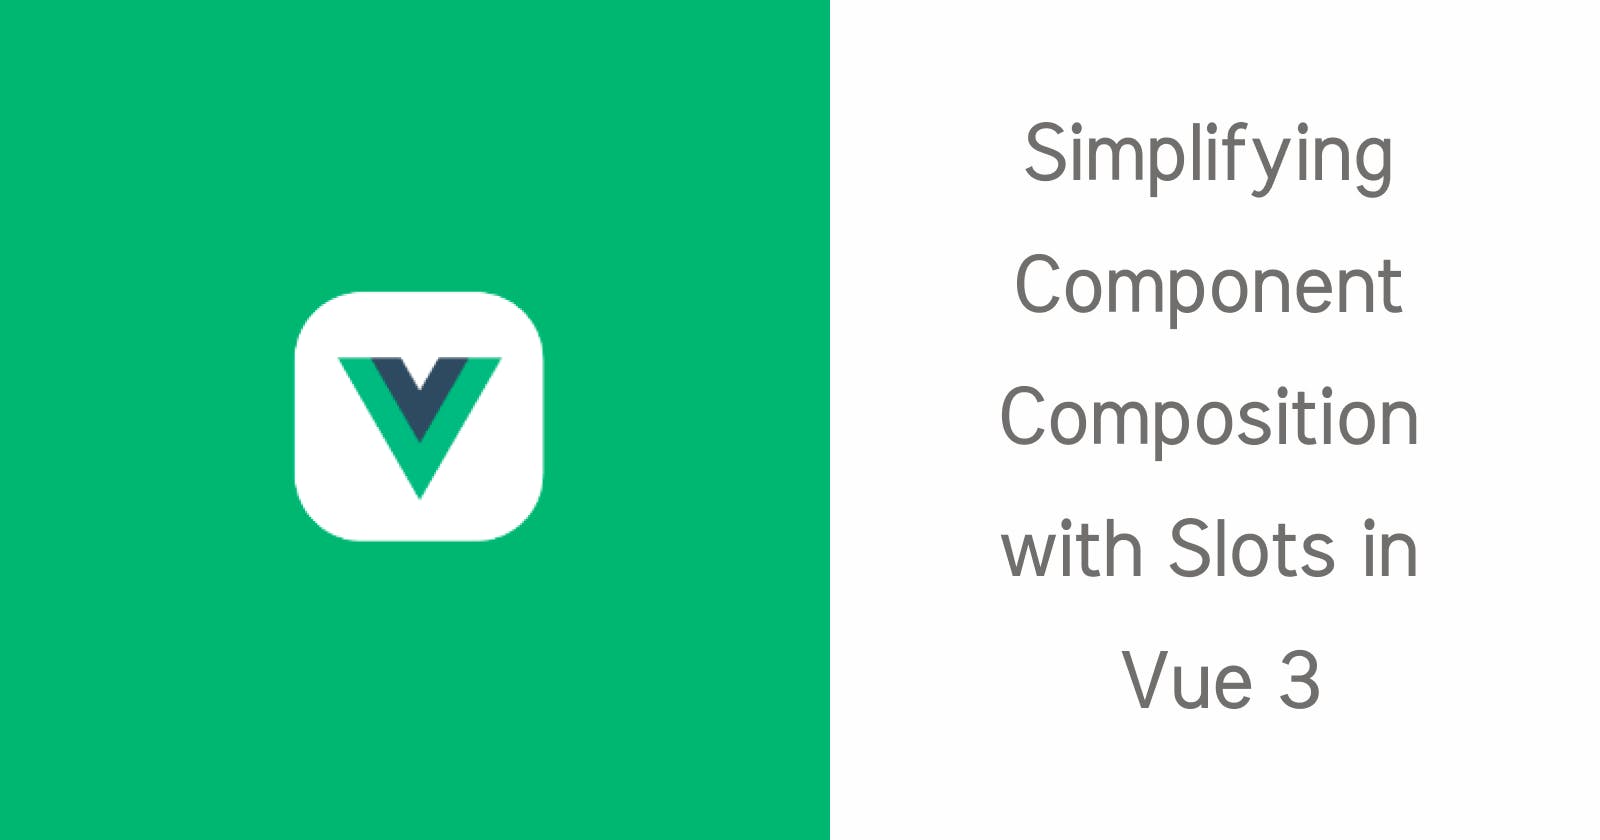 Simplifying Component Composition with Slots in Vue 3